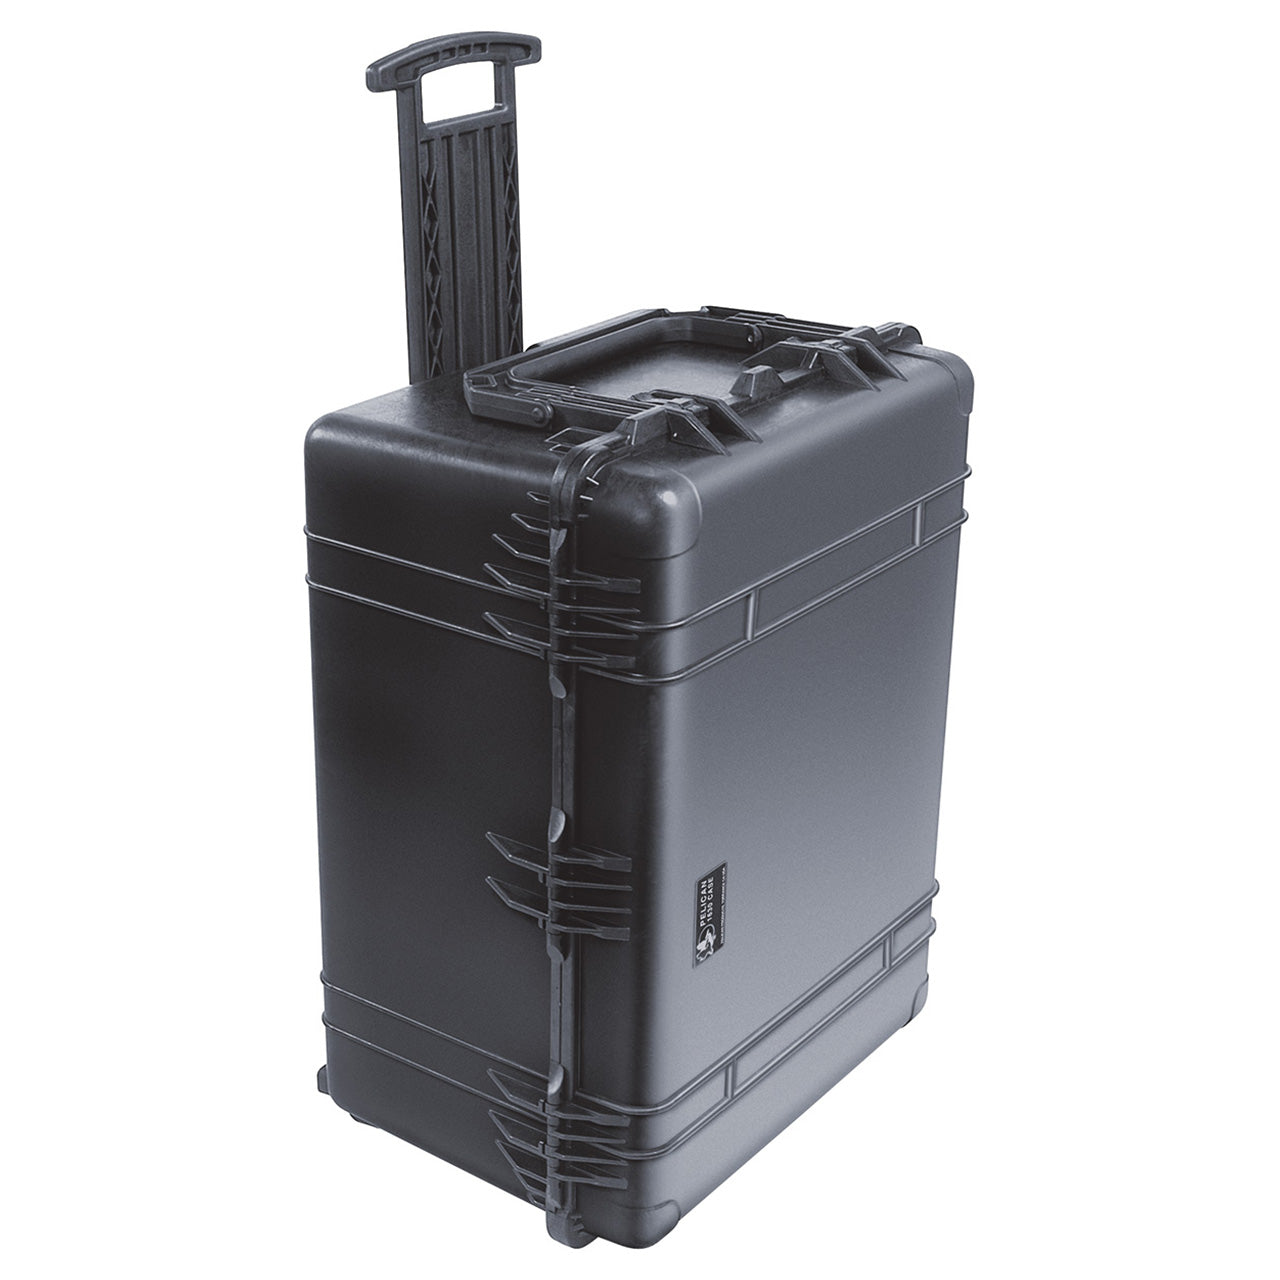 Pelican 1630 Protector Transport Case Unbreakable Watertight Dustproof Trolley Hard Casing with Extension Handle and Wheels, IP67 Rating (with Dividers)